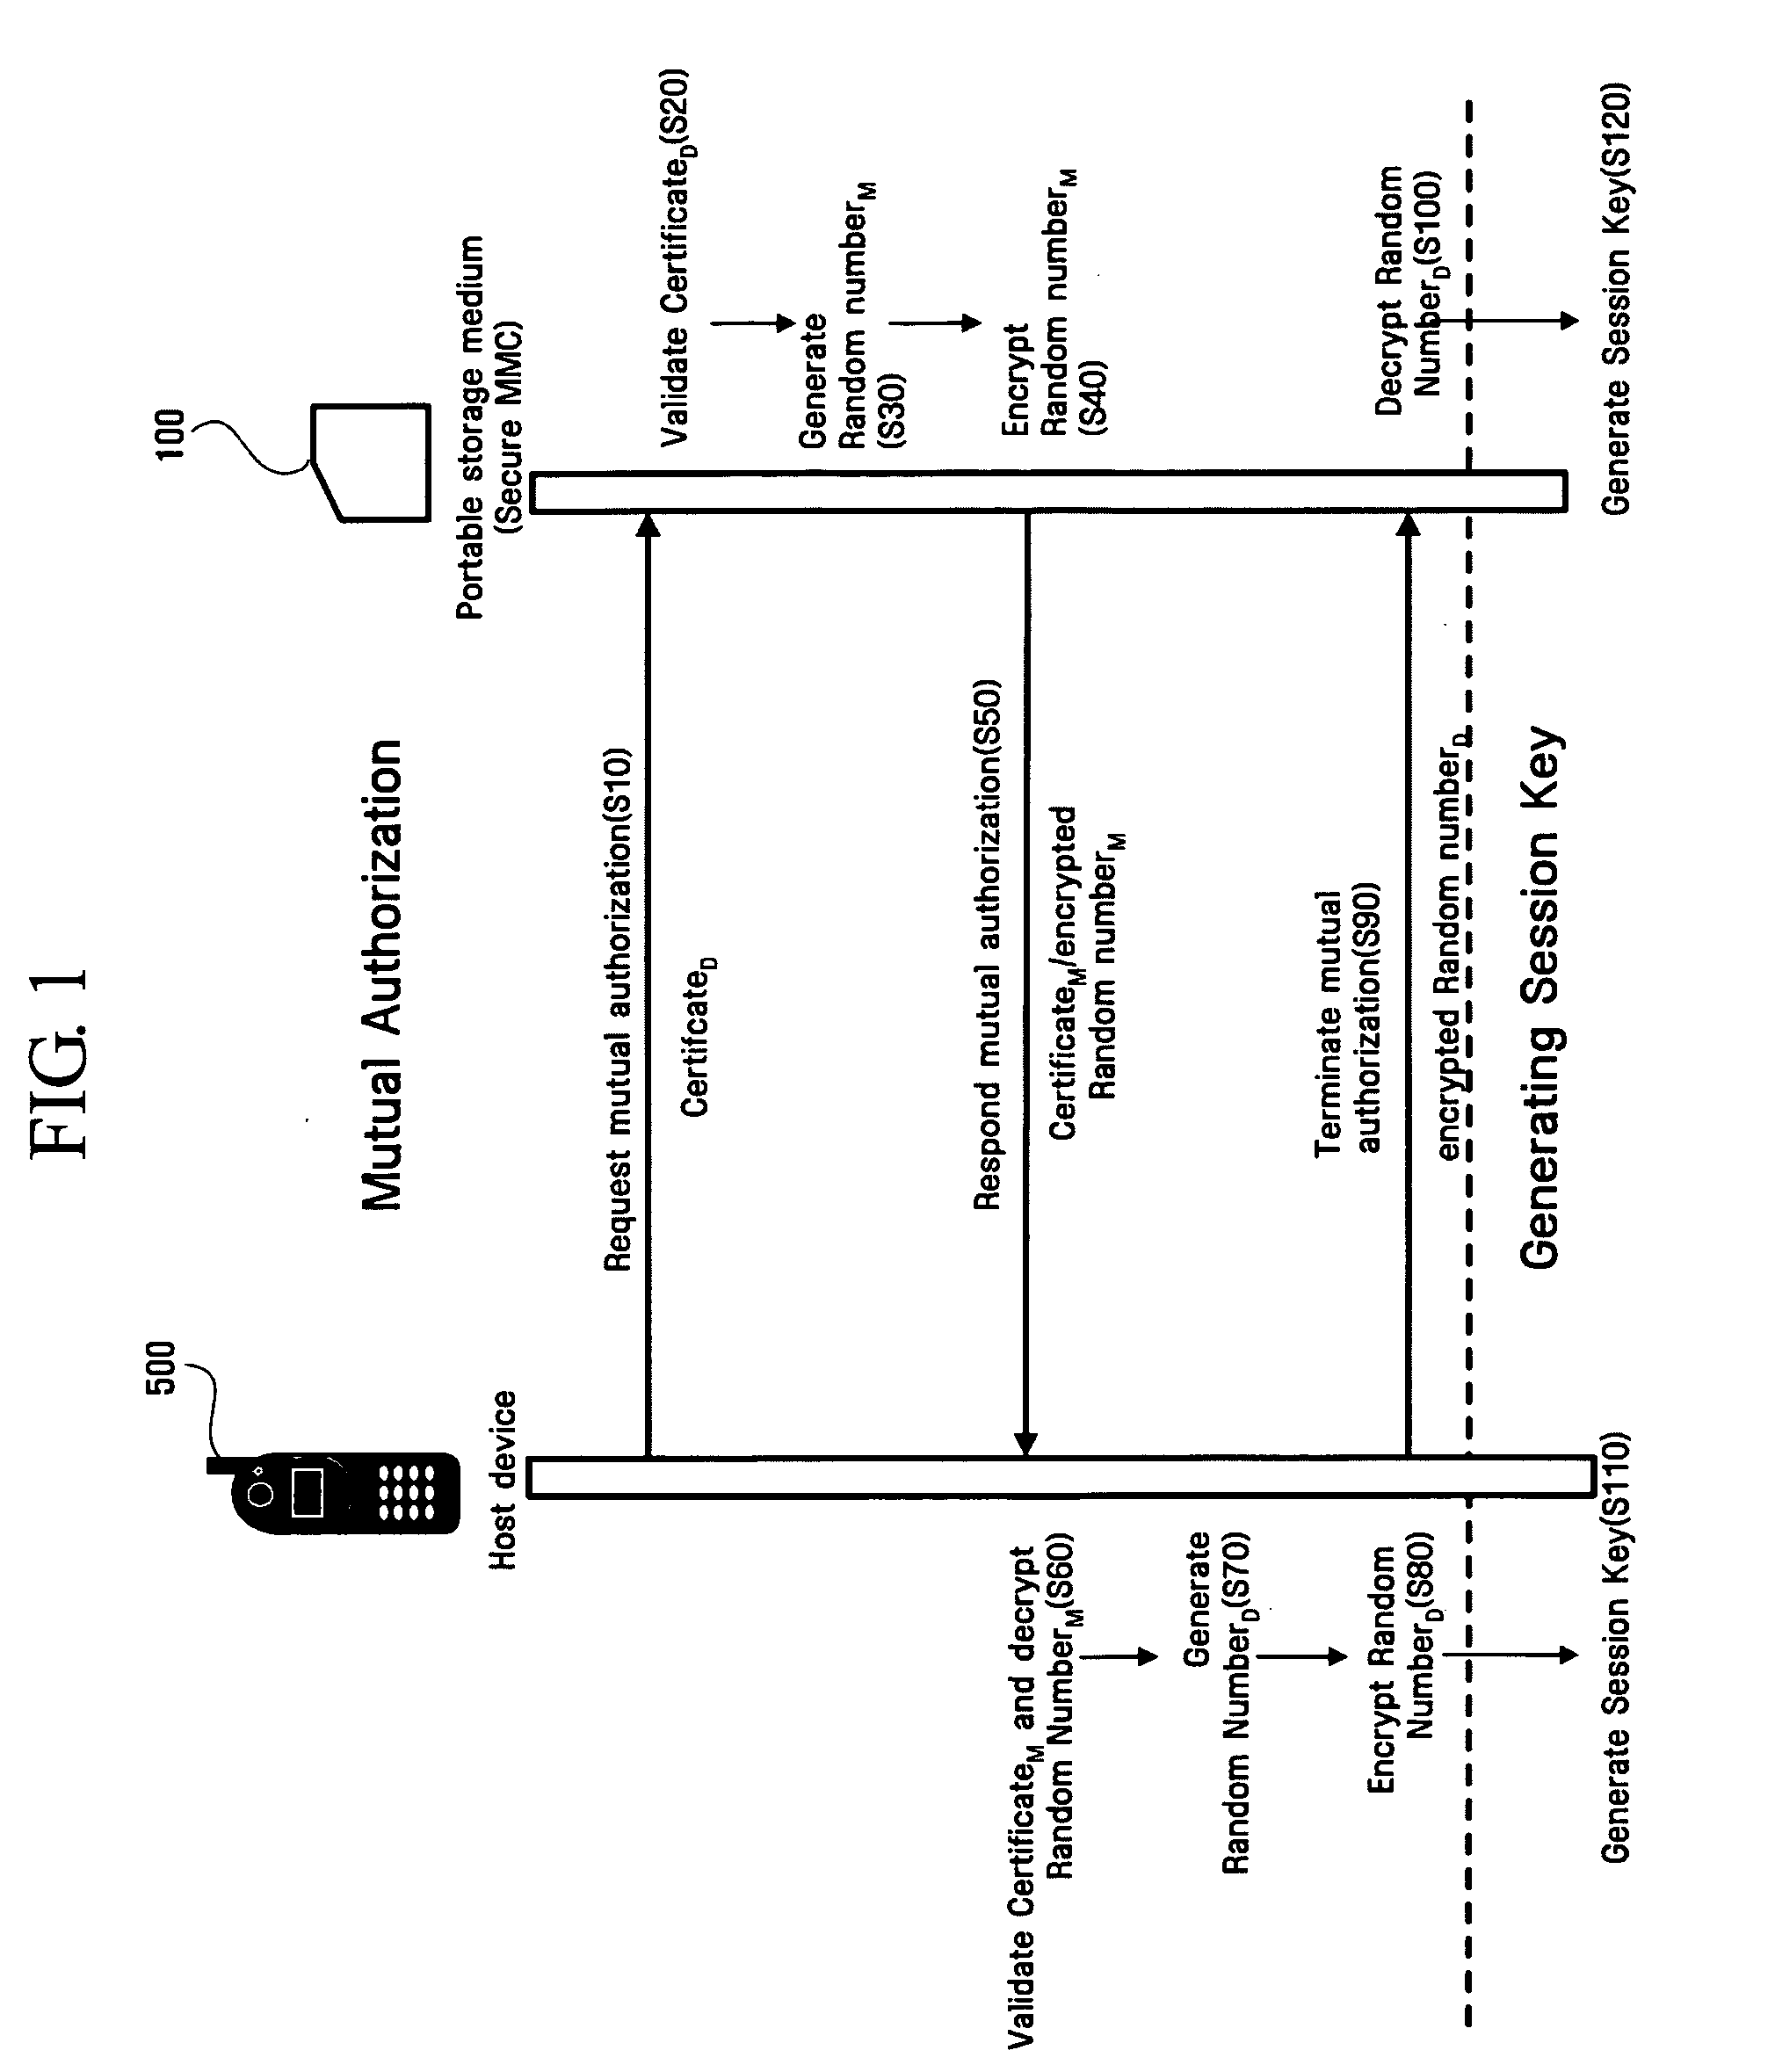 Method and apparatus for searching rights objects stored in portable storage device using object location data